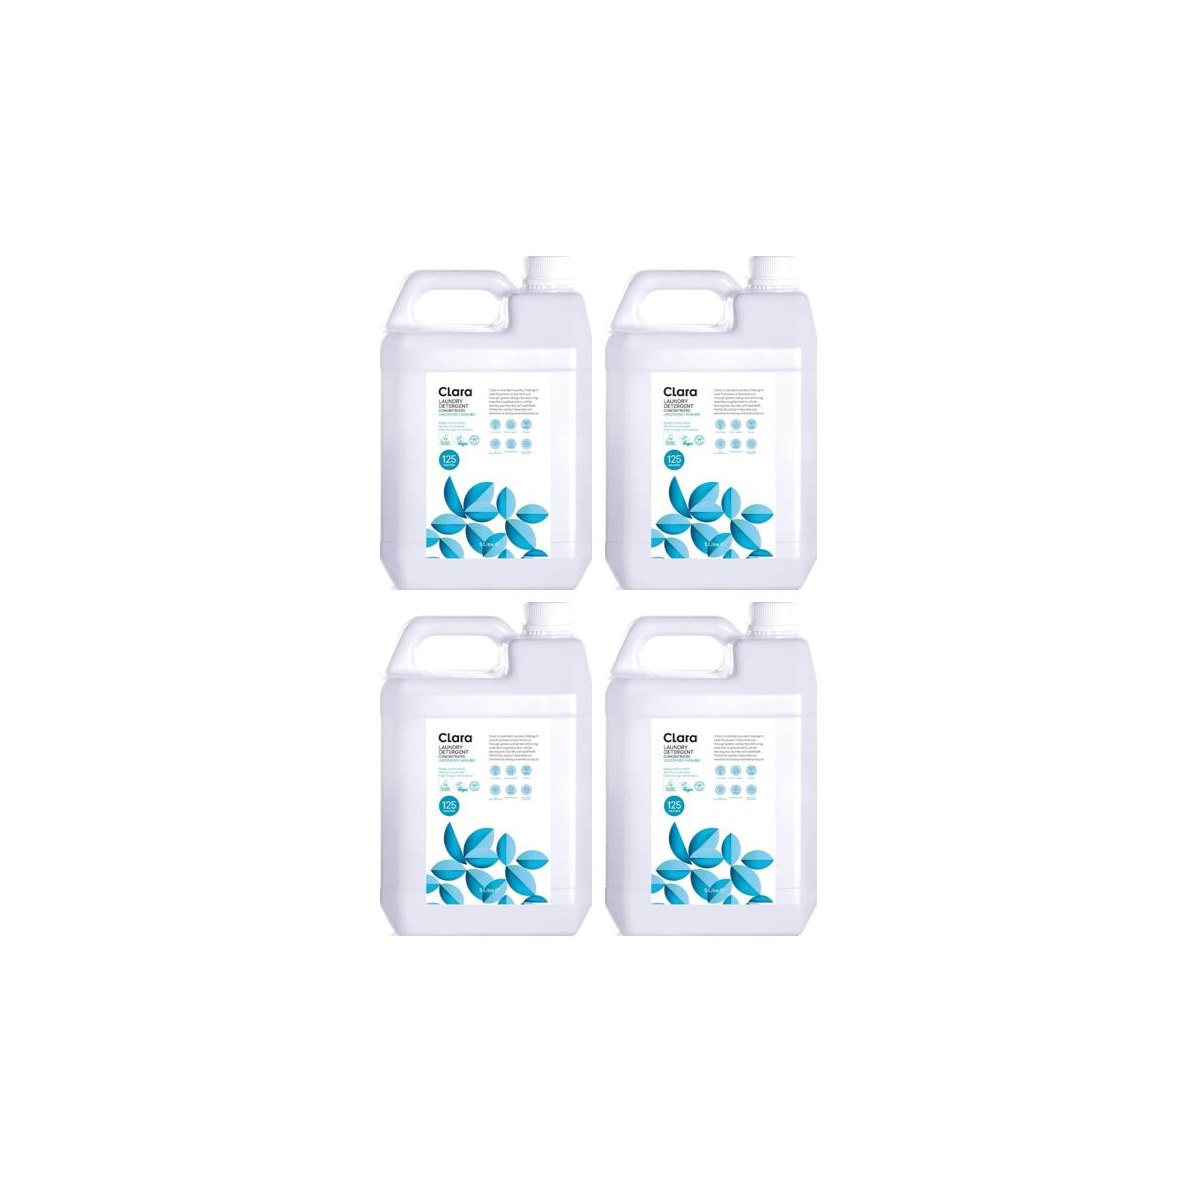 4 x Clara Concentrated Laundry Detergent Unscented Non-Bio 5L